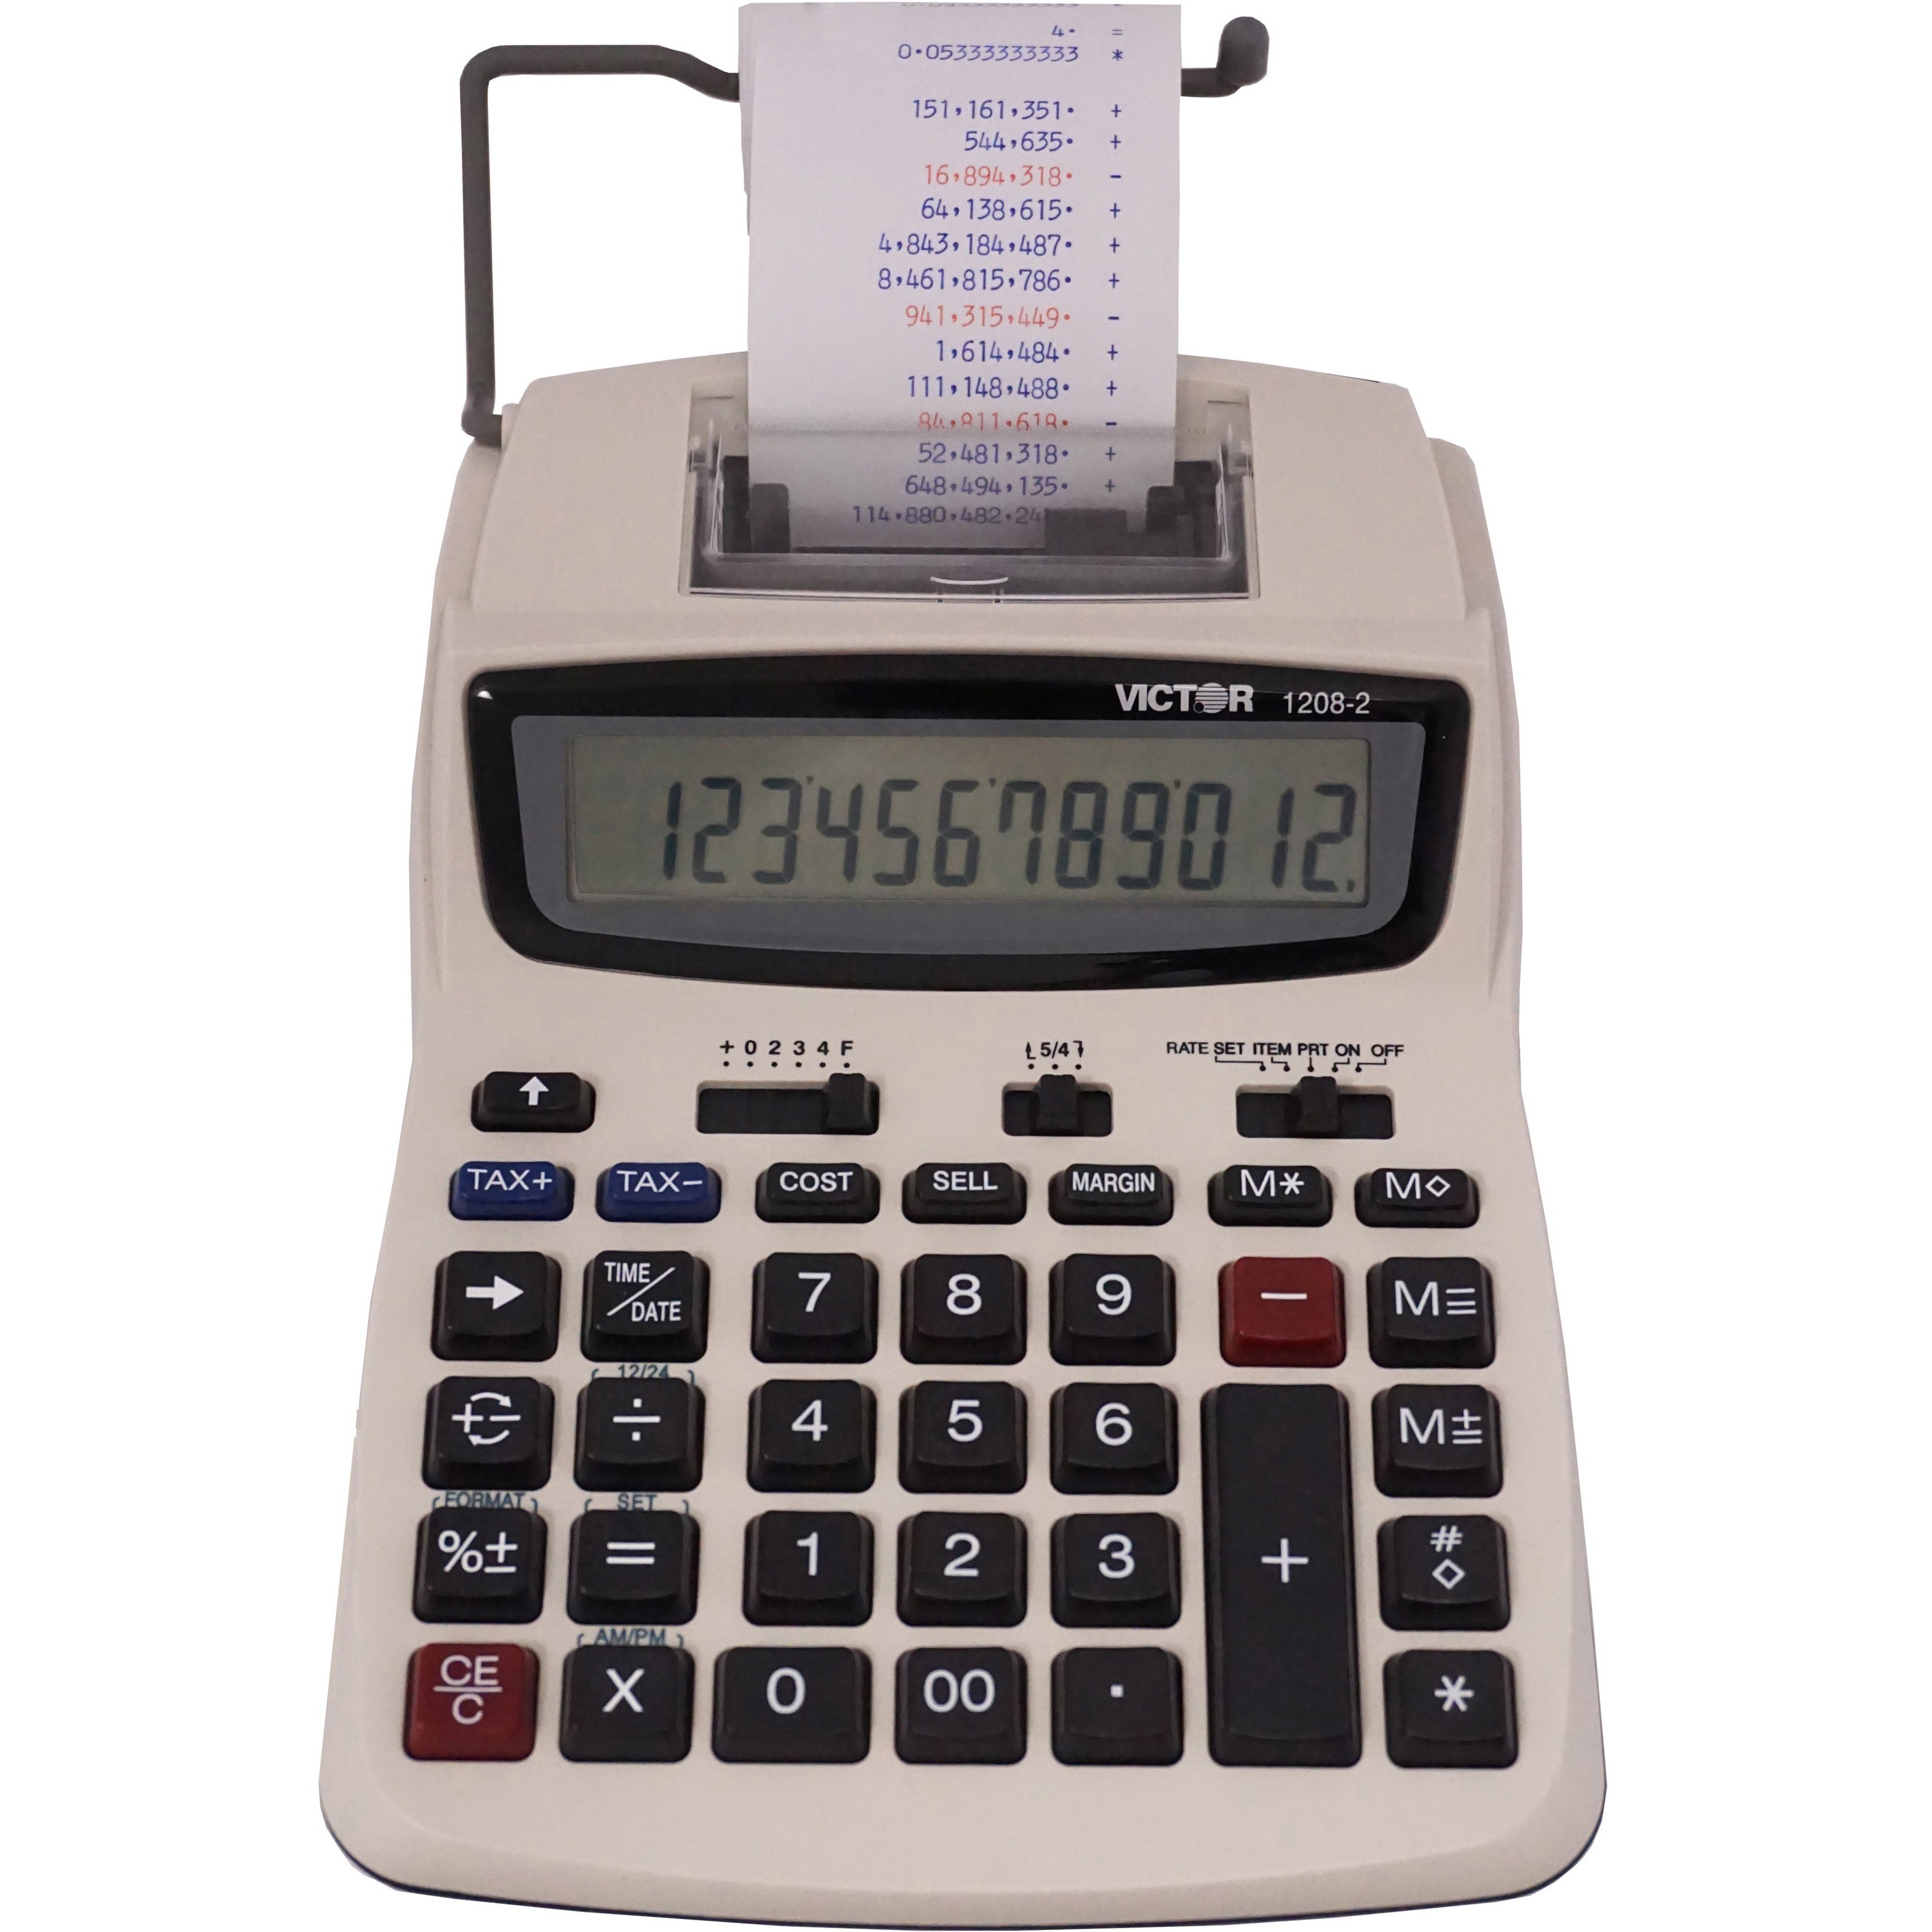 VCT 12082 Victor 12082 Printing Calculator VCT12082